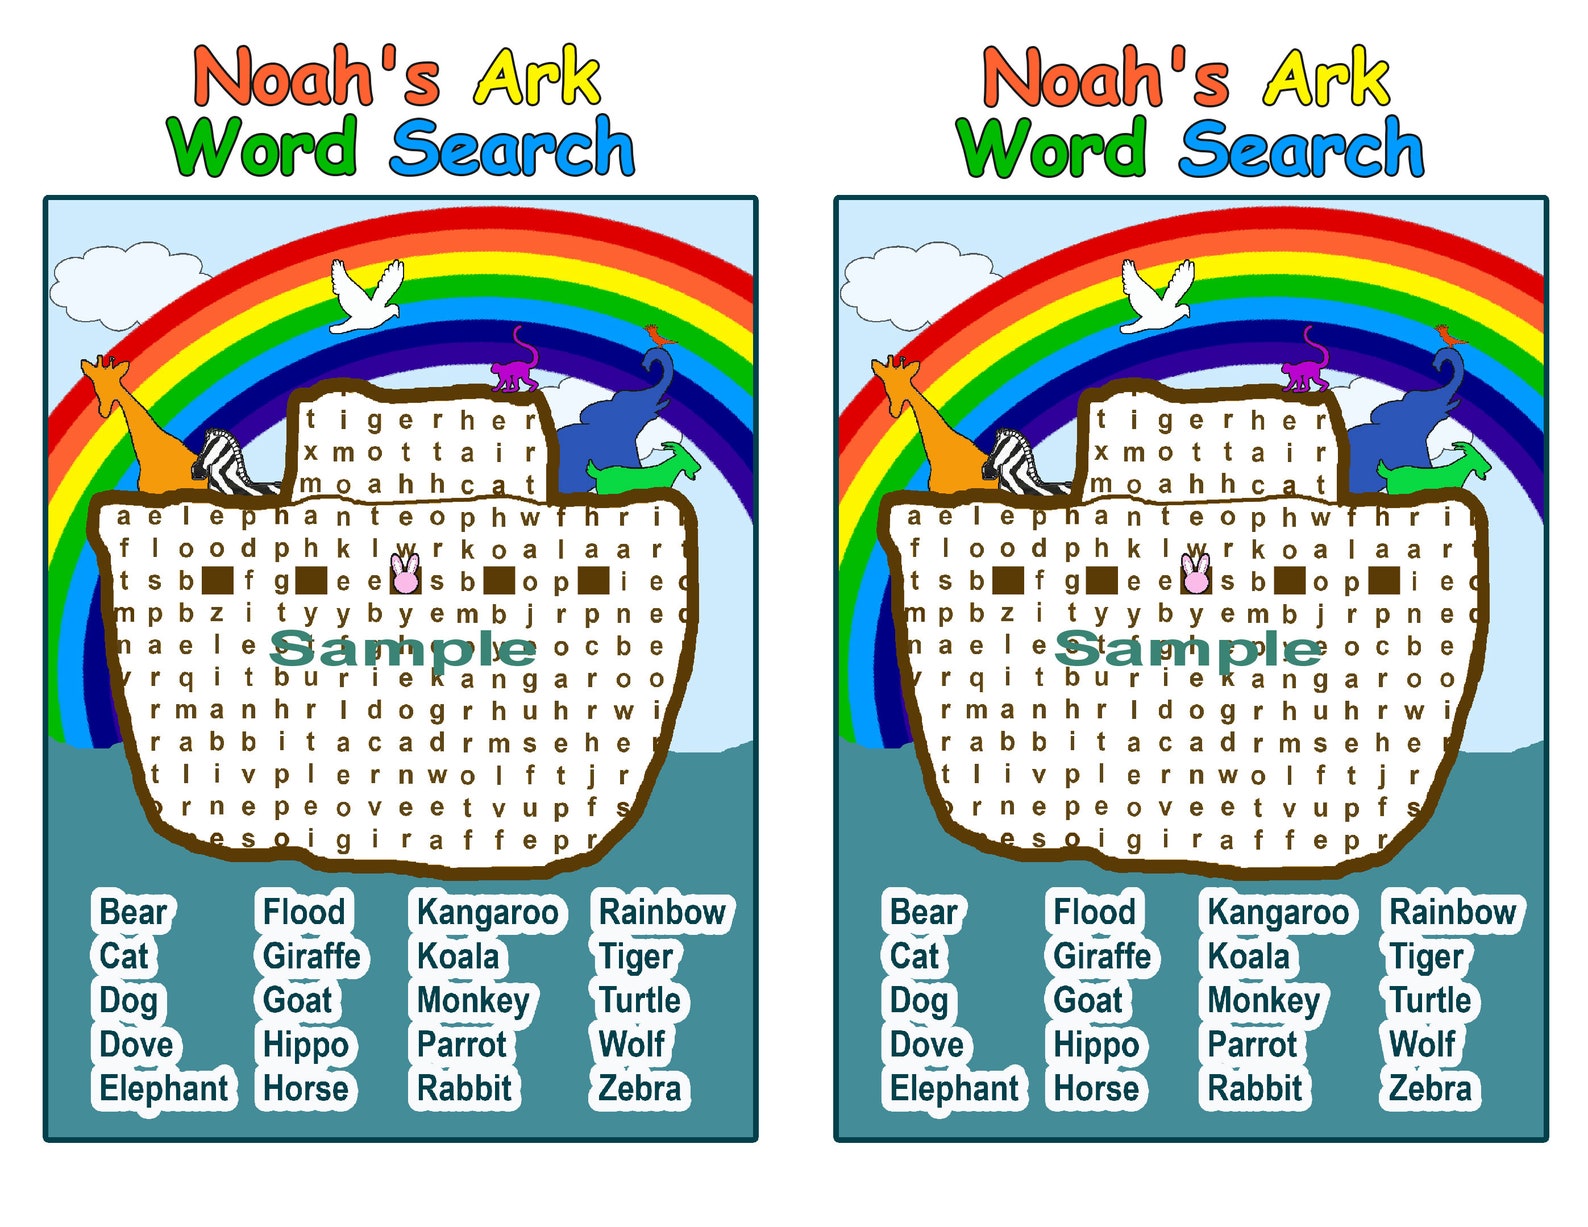 noah-s-ark-word-search-puzzle-instant-digital-download-etsy